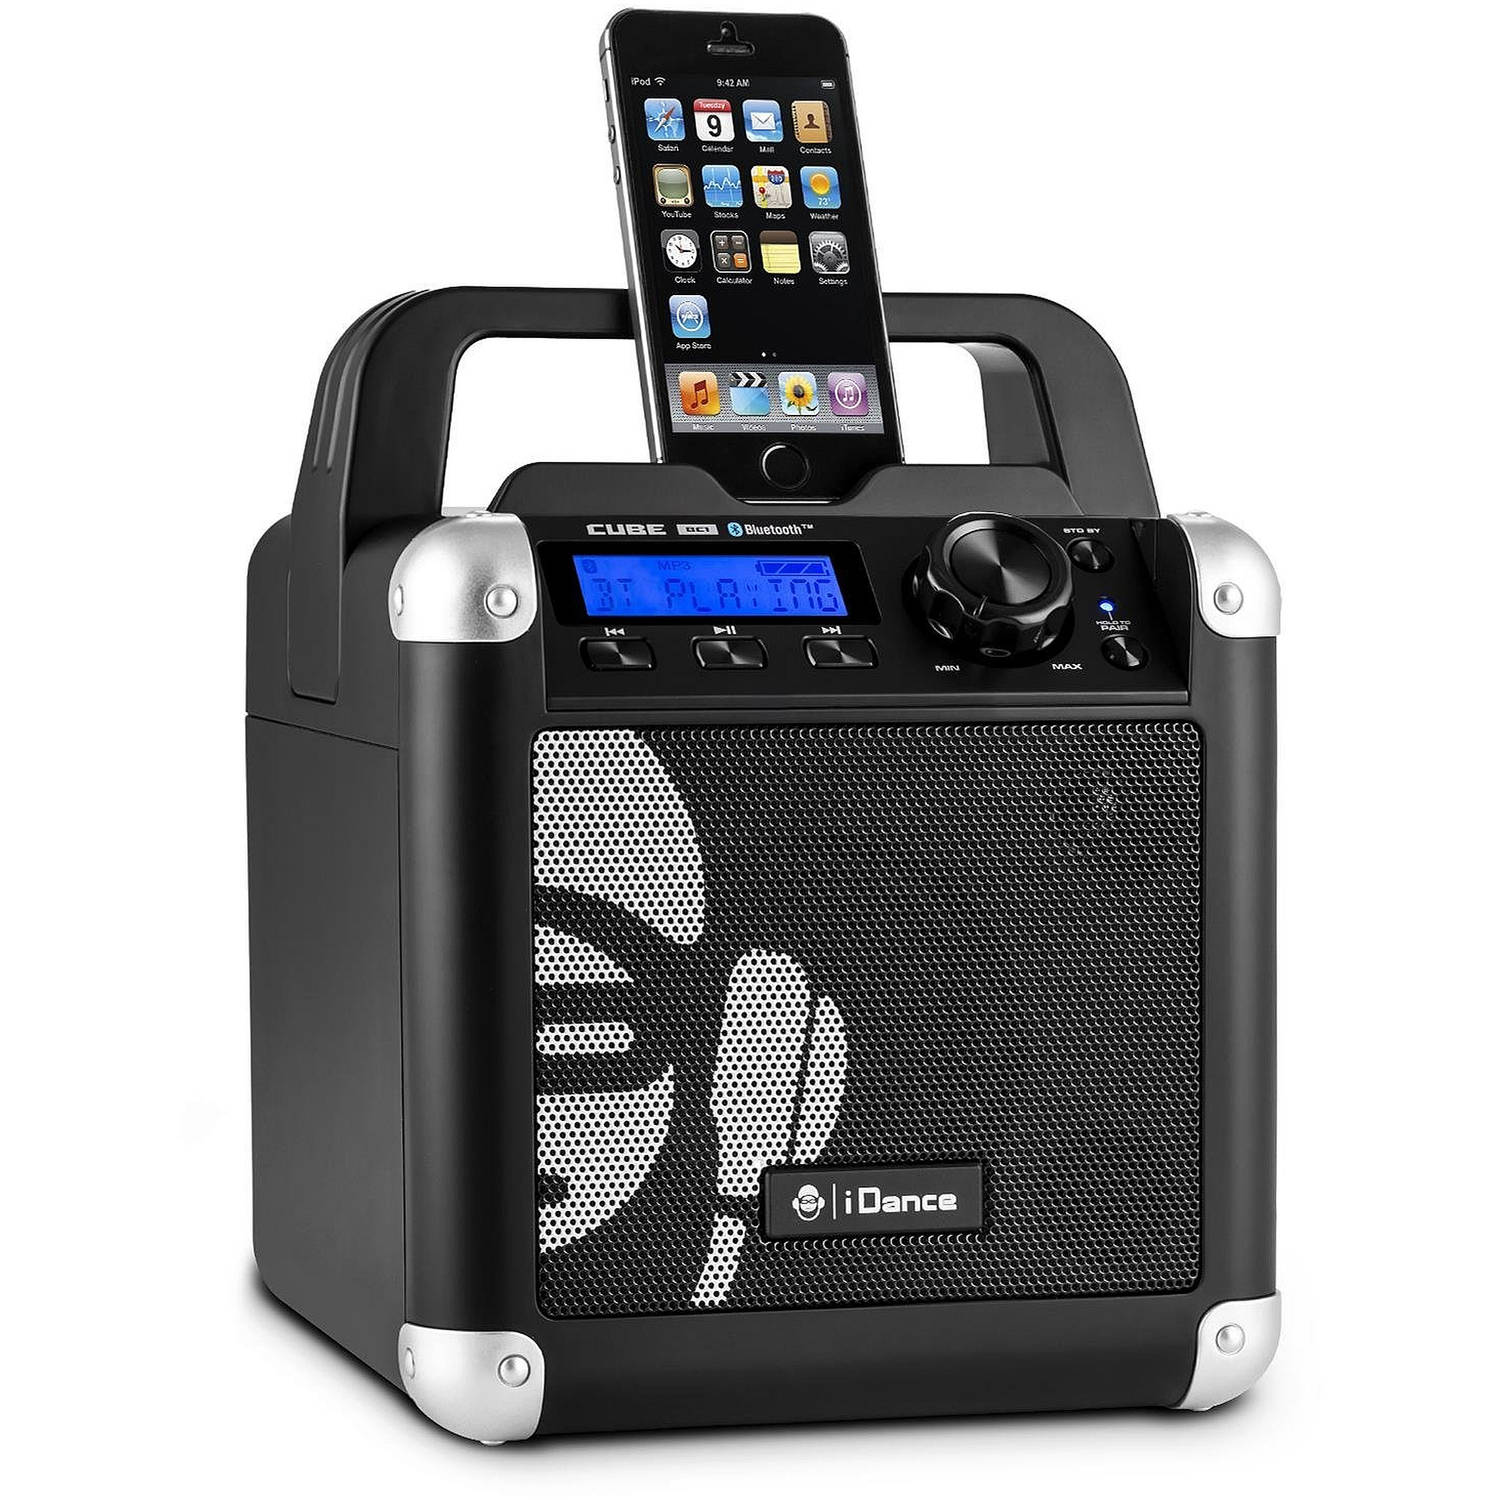 iDance Mobile Cube Portable Bluetooth Speaker with LCD Display, Black, BC1 - image 3 of 3